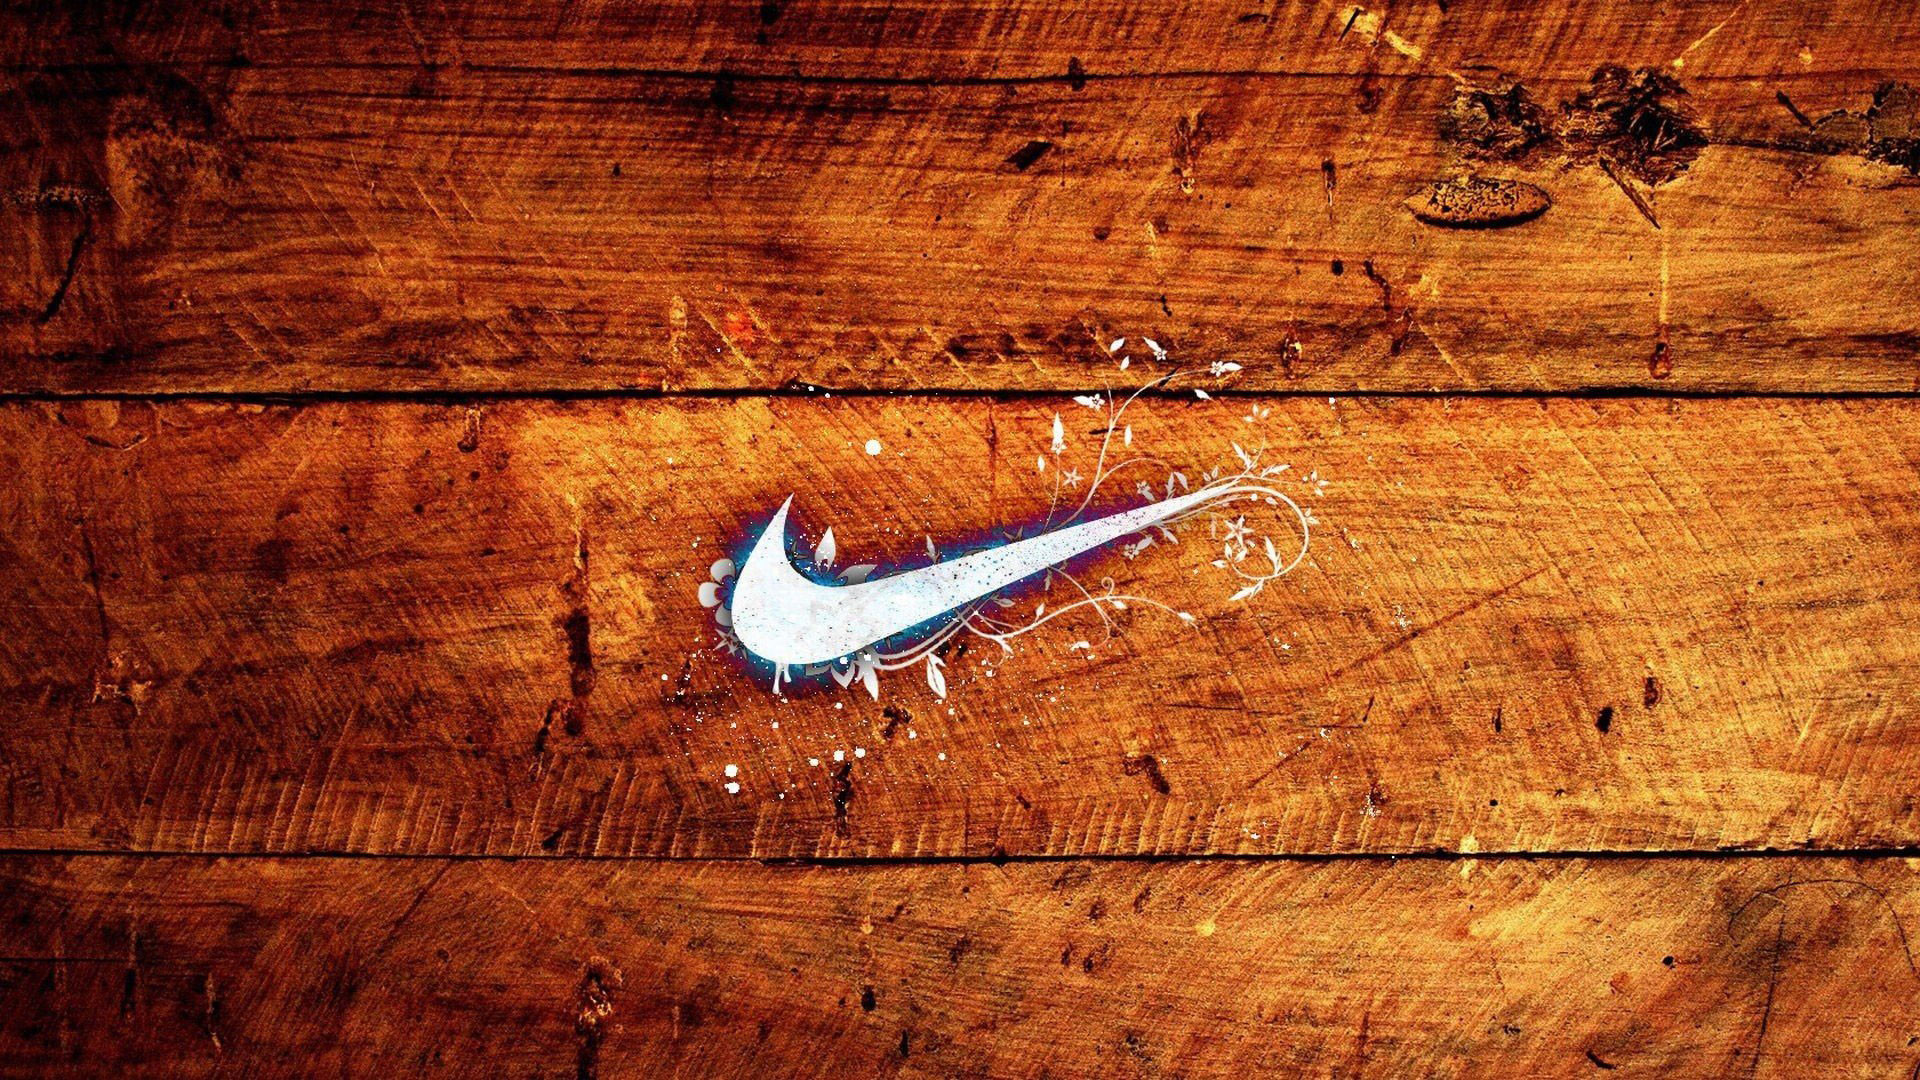 1920x1080 hd pics photos best nike logo abstract on wood hd quality desktop  background wallpaper